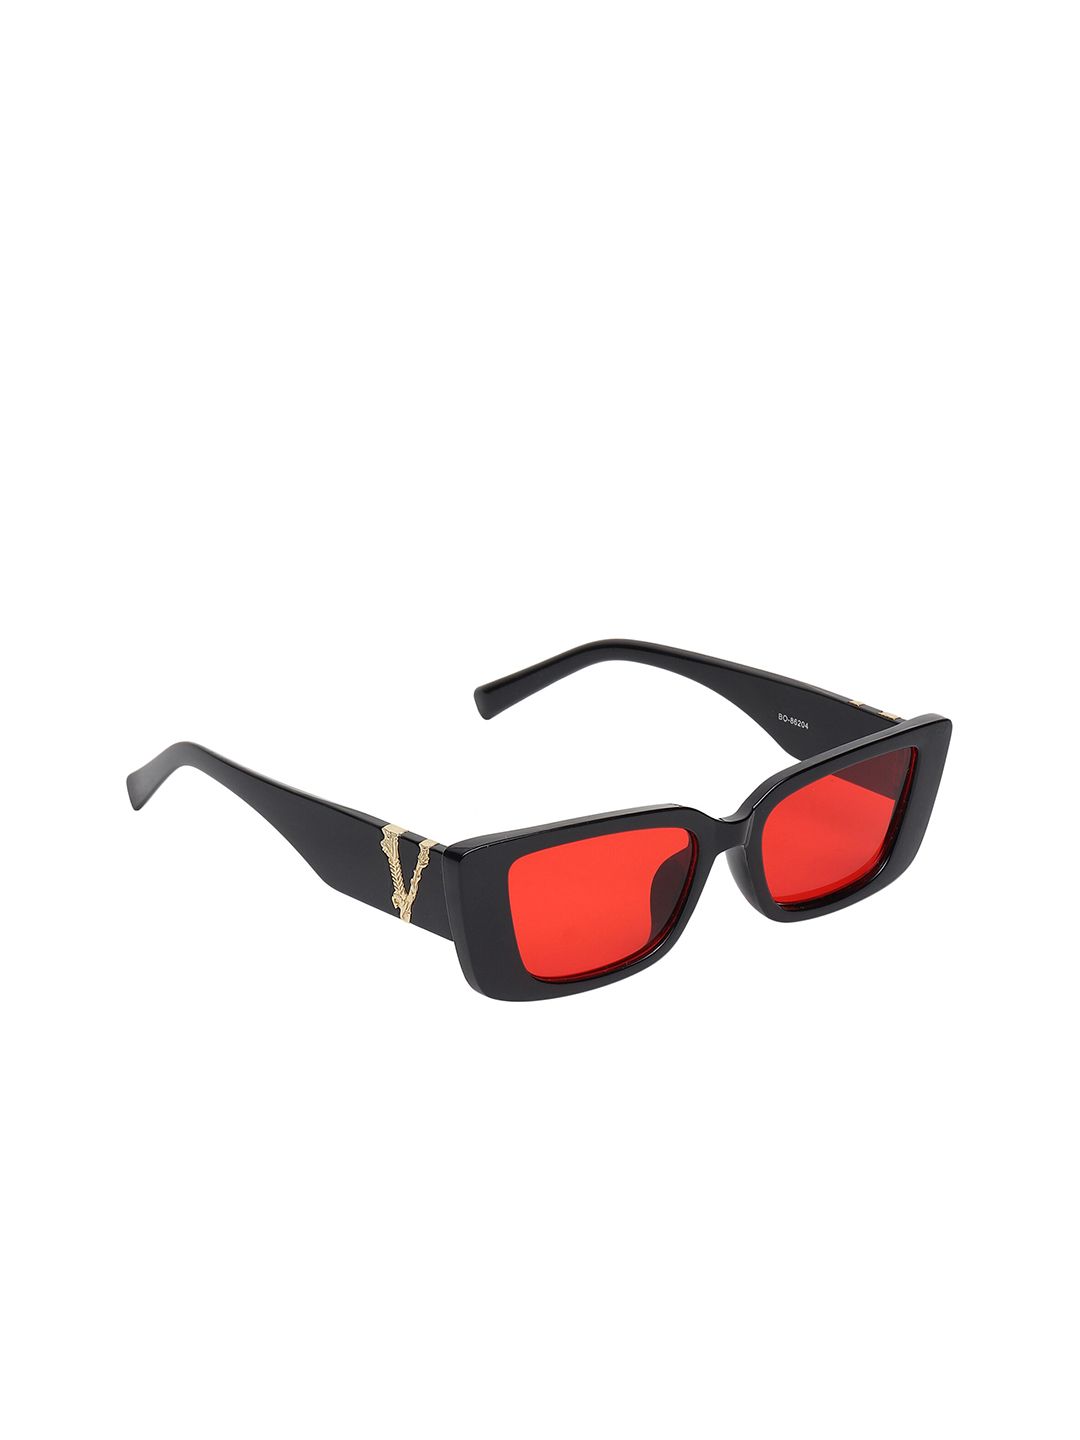 ALIGATORR Unisex Red Lens & Black Rectangle Sunglasses with UV Protected Lens Price in India